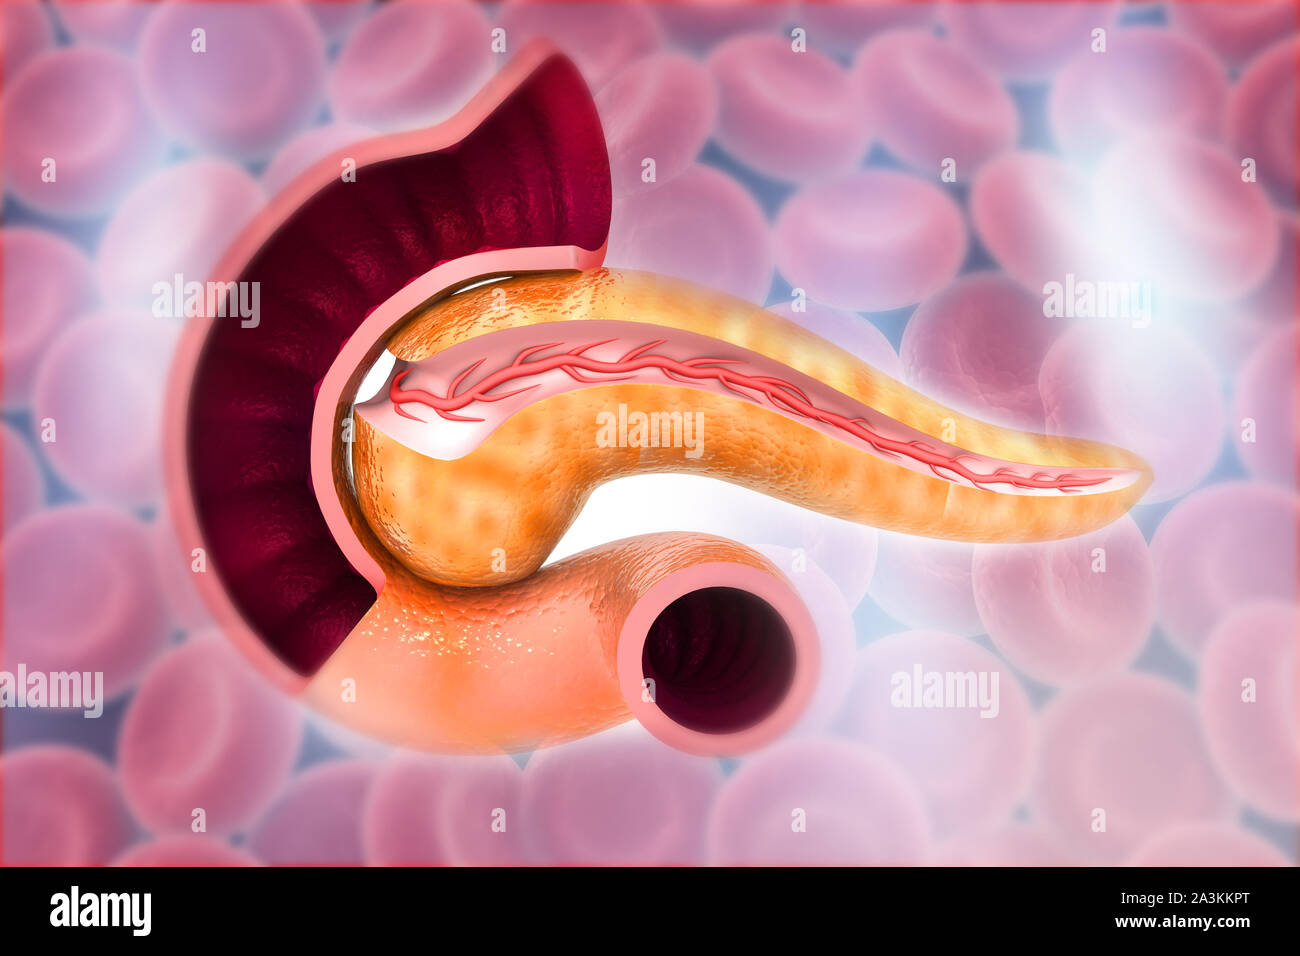 Cross Section Of Pancreas on bloodcells background. 3d render Stock Photo